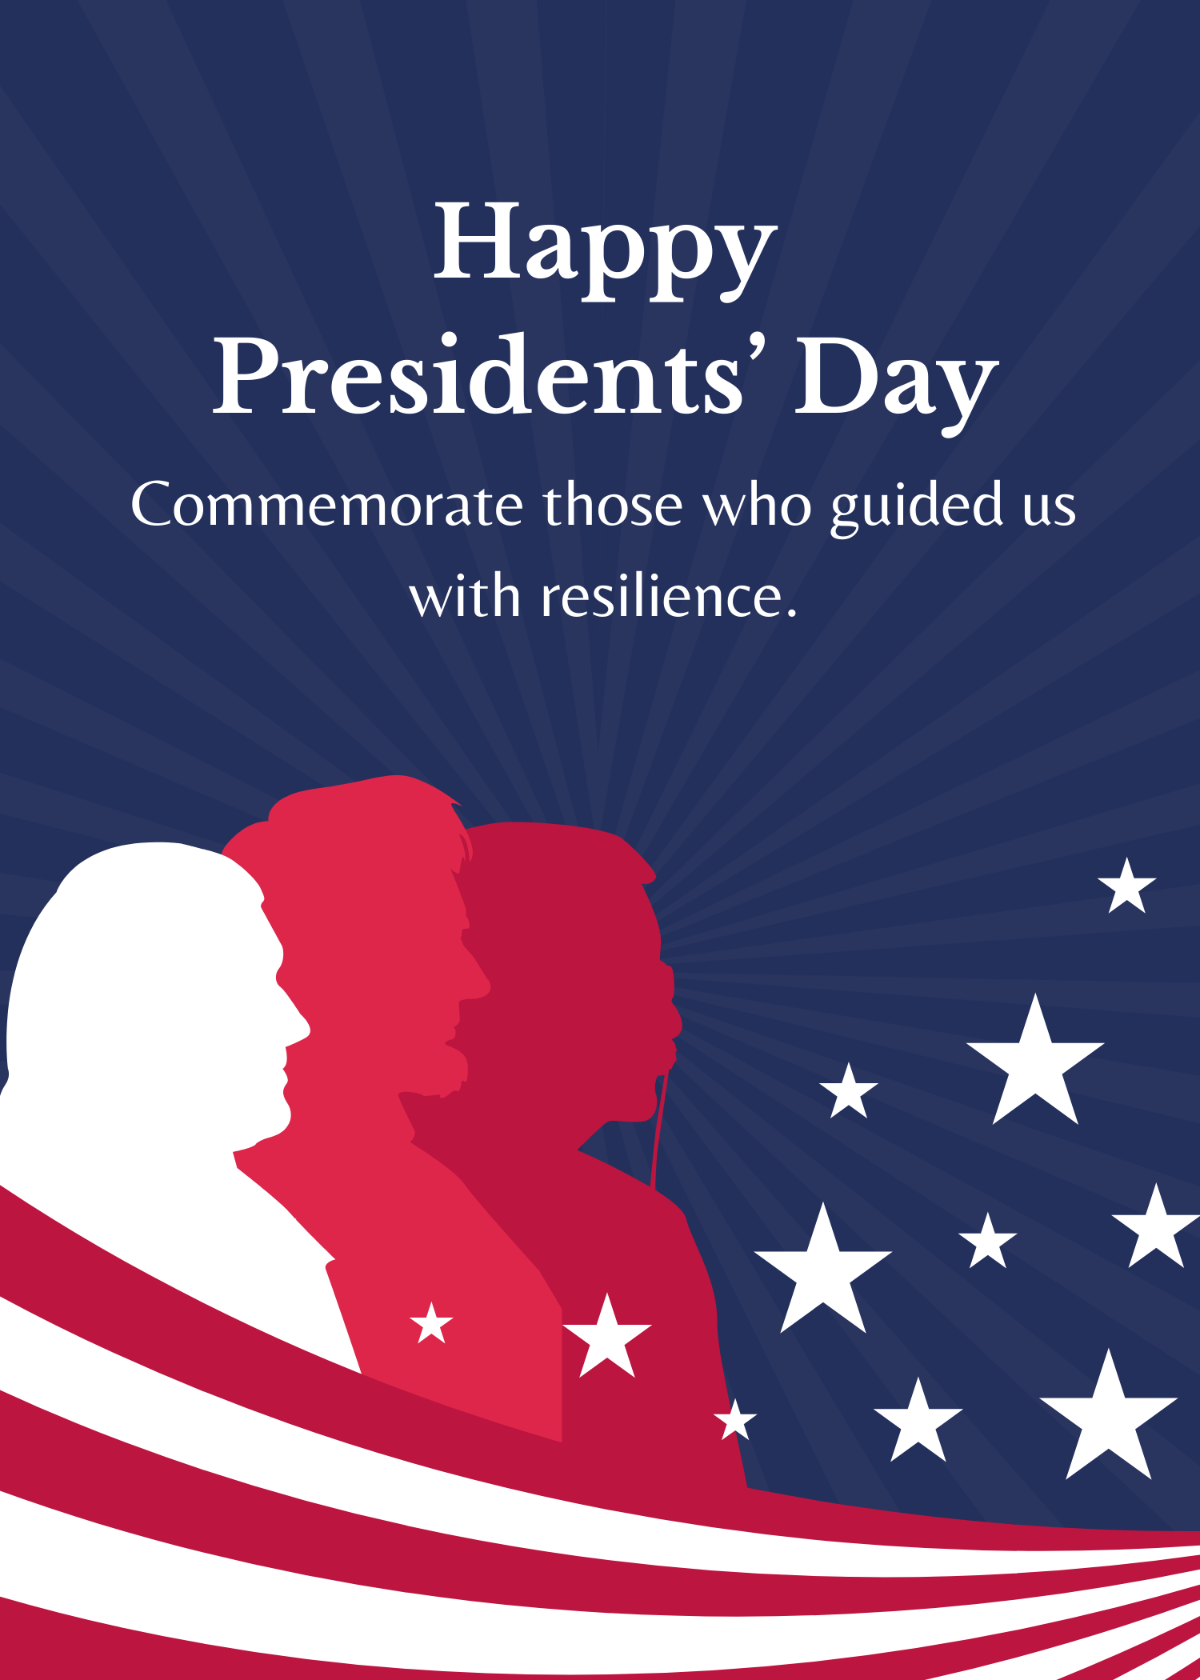 Free Happy President's Day Greetings Template